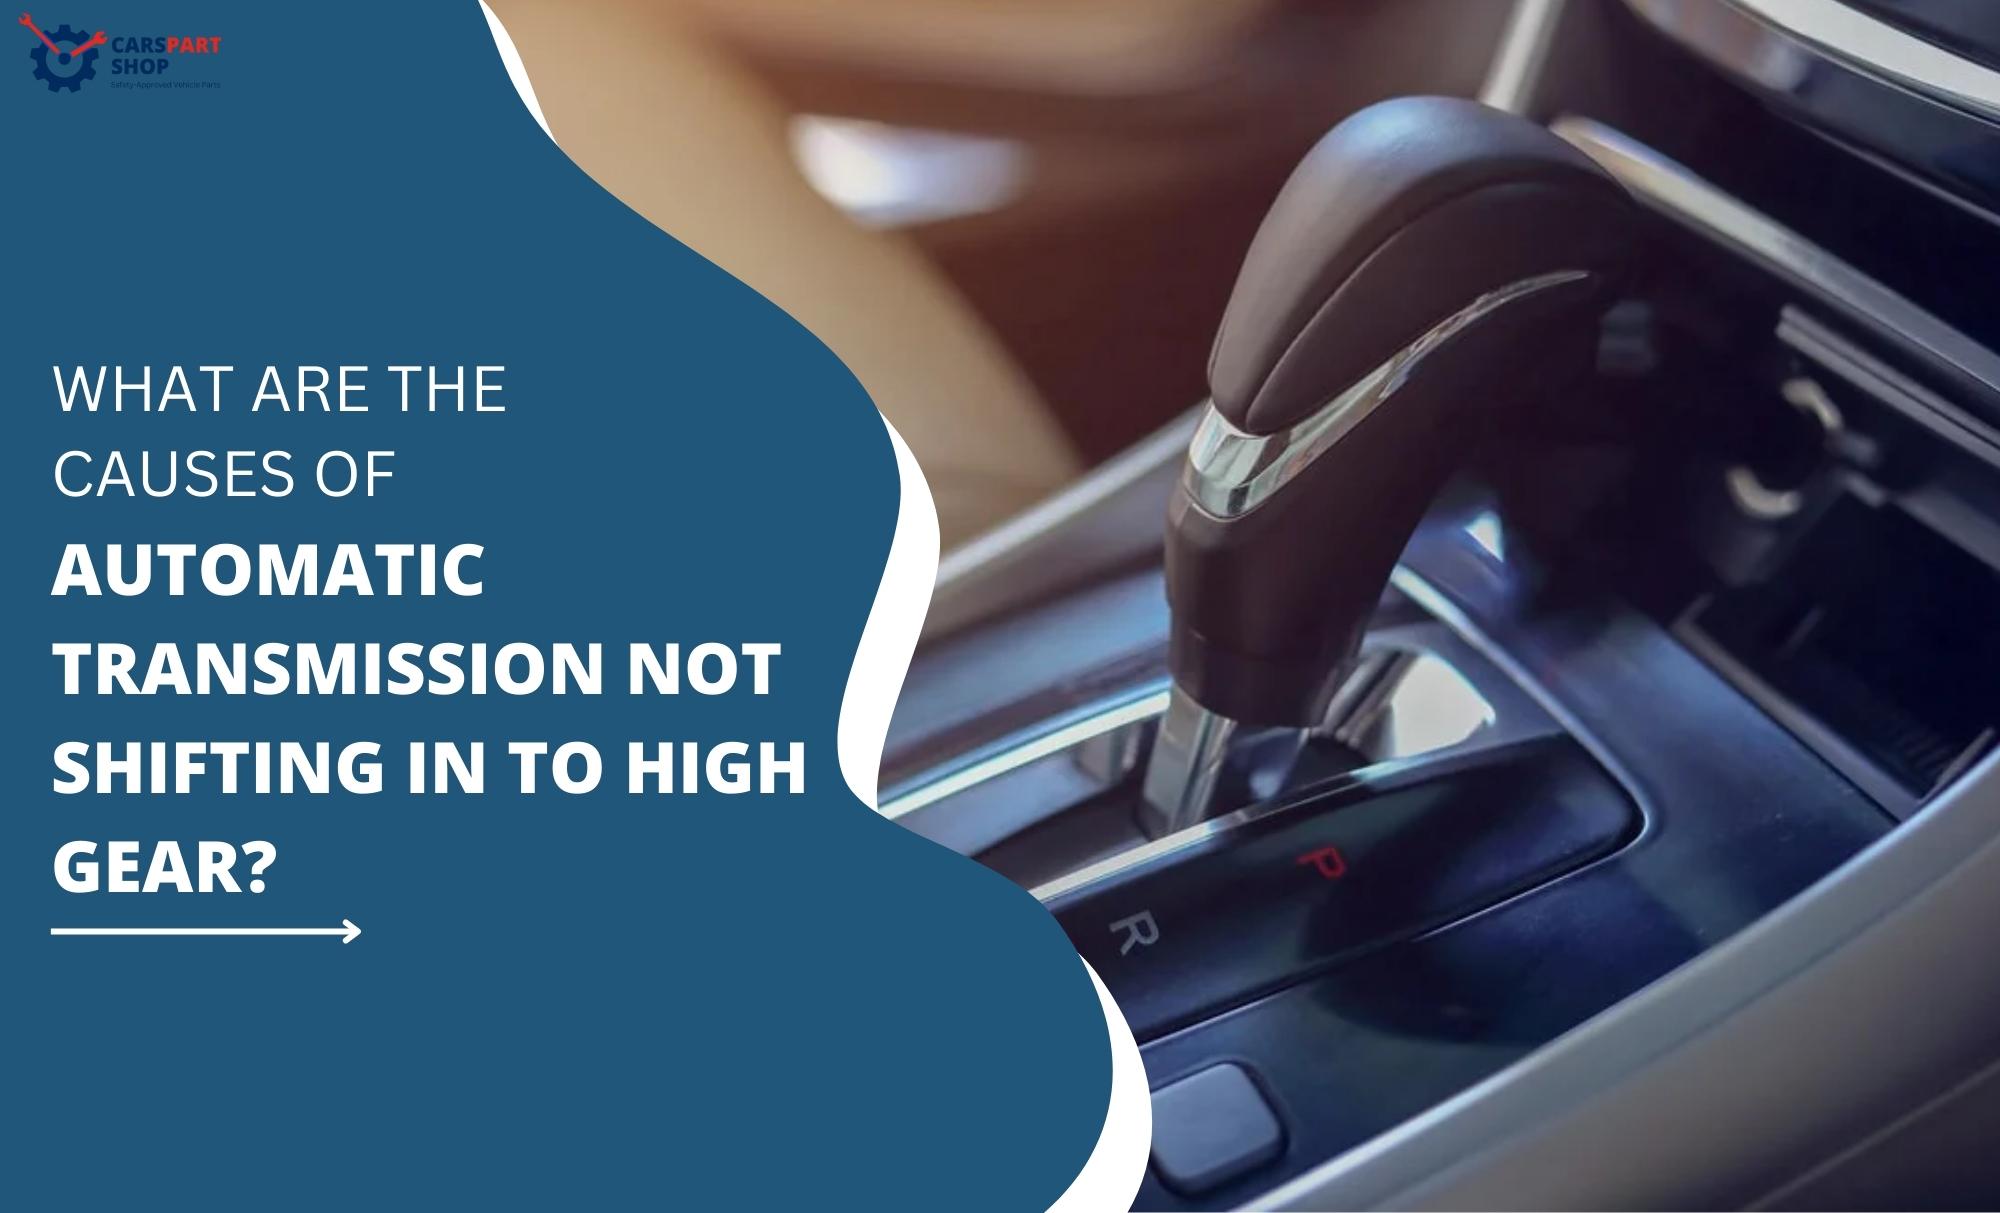 Causes of Automatic Transmission Not Shifting into High Gear